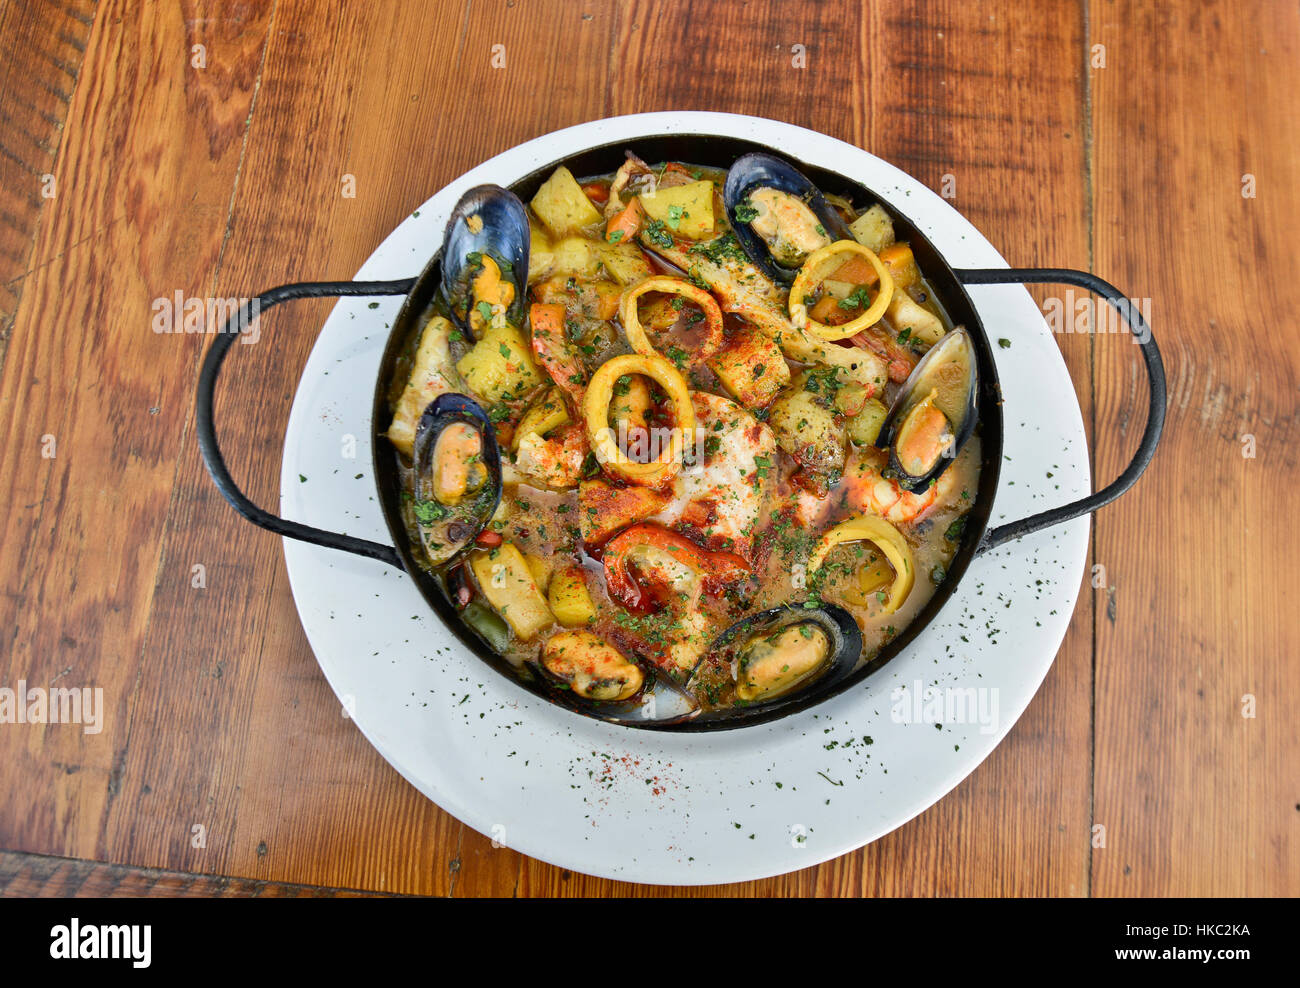 Traditional Spanish seafood stew (cazuela de mariscos) served on wooden  table Stock Photo - Alamy